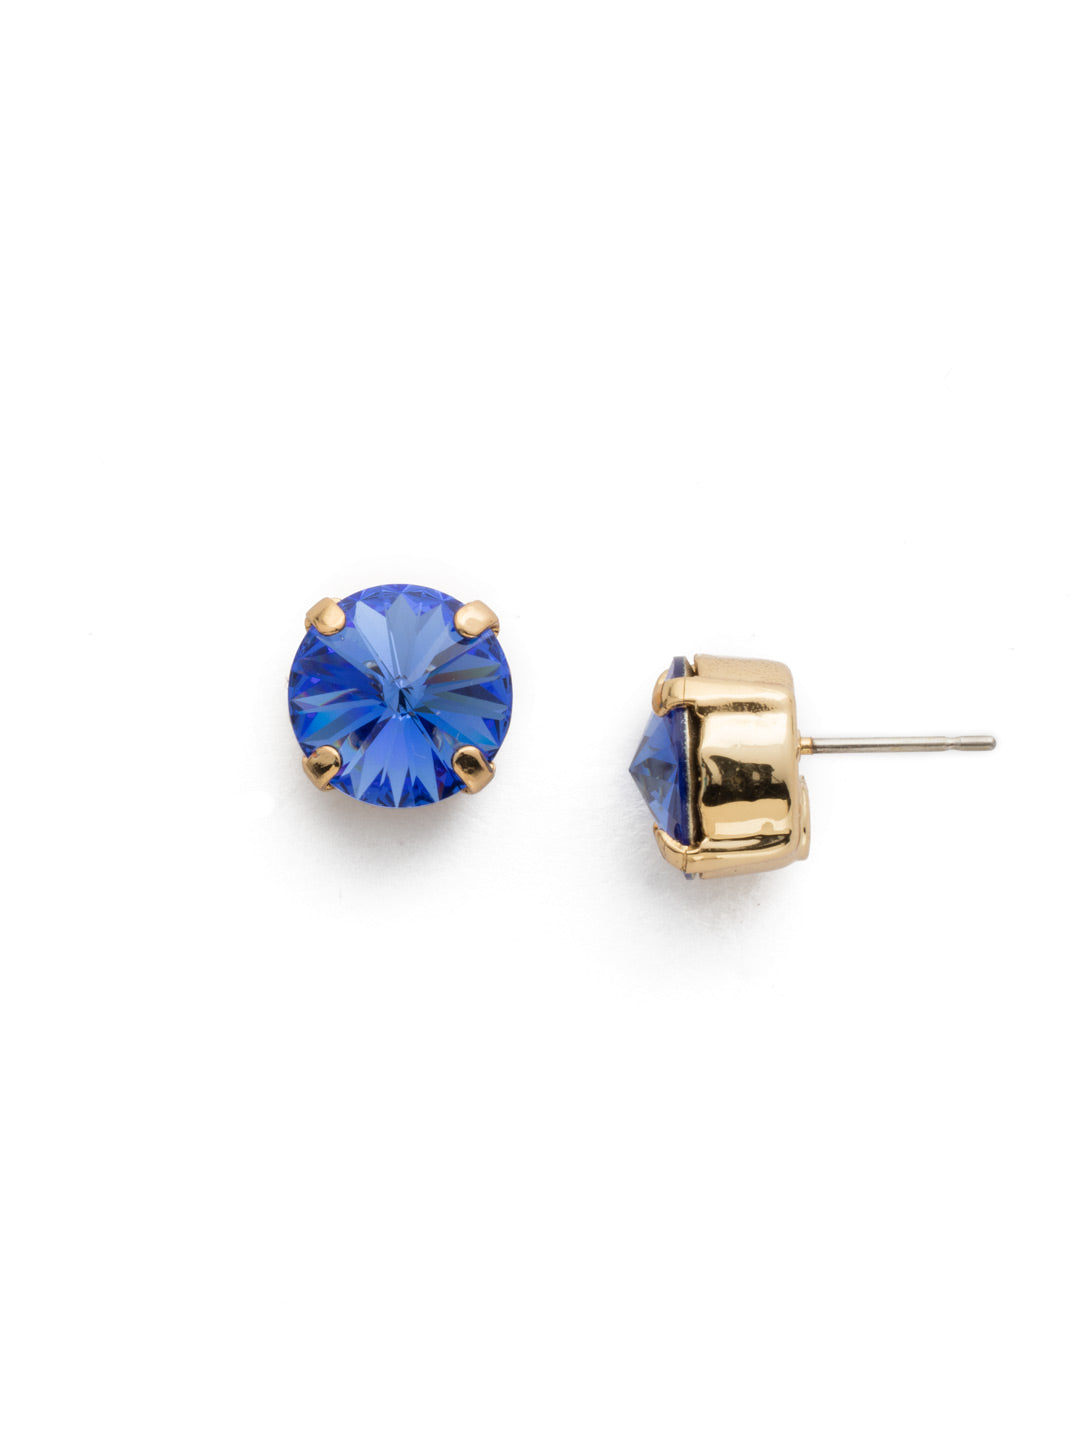 London Stud Earrings - ECM14BGSAP - <p>Everyone needs a great pair of studs. Add some classic sparkle to any occasion with these stud earrings. Need help picking a stud? <a href="https://www.sorrelli.com/blogs/sisterhood/round-stud-earrings-101-a-rundown-of-sizes-styles-and-sparkle">Check out our size guide!</a> From Sorrelli's Sapphire collection in our Bright Gold-tone finish.</p>